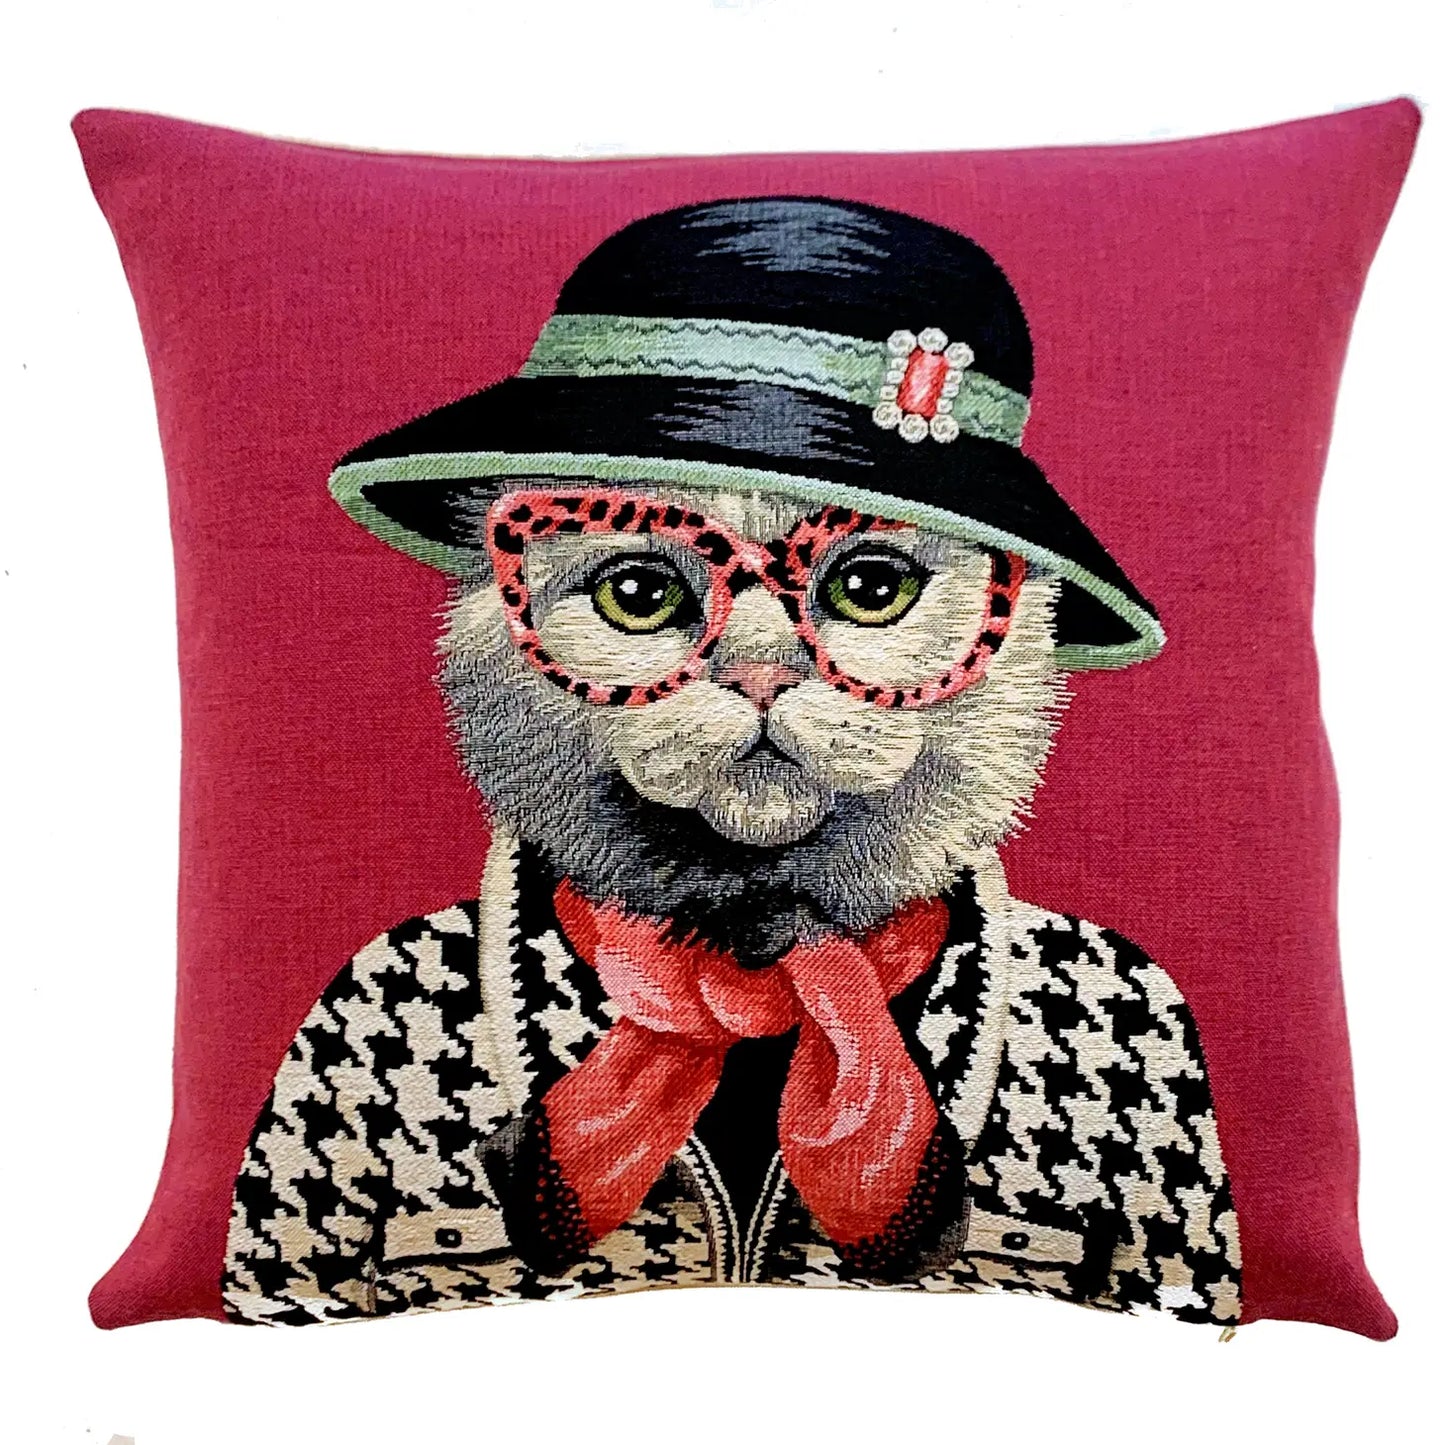 Pillow: Quirky Houndstooth British Cat